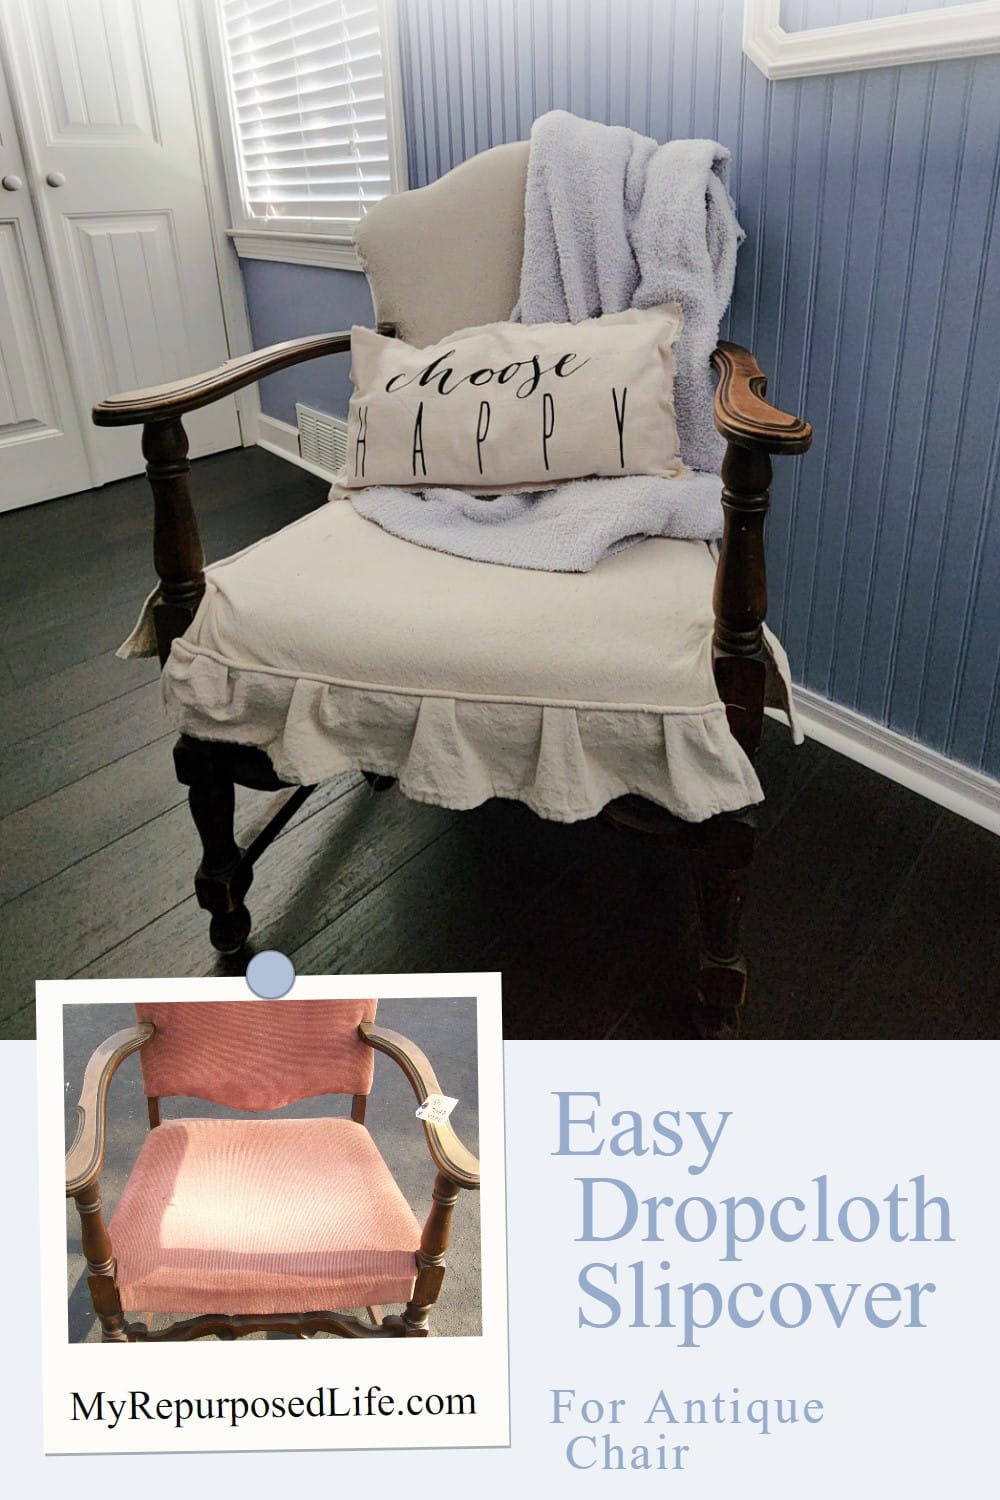 I've never really loved to sew, but I can do enough to get by. If I can make this easy slipcover for an ugly chair, so can you! Drop Cloth material was used. Inexpensive and durable. You can't beat it. Ten years has passed since I originally did this project, and it still makes me smile when I see it in my bedroom. #MyRepurposedLife #repurposed #furniture #chair #thriftstore #dropcloth #slipcover via @repurposedlife